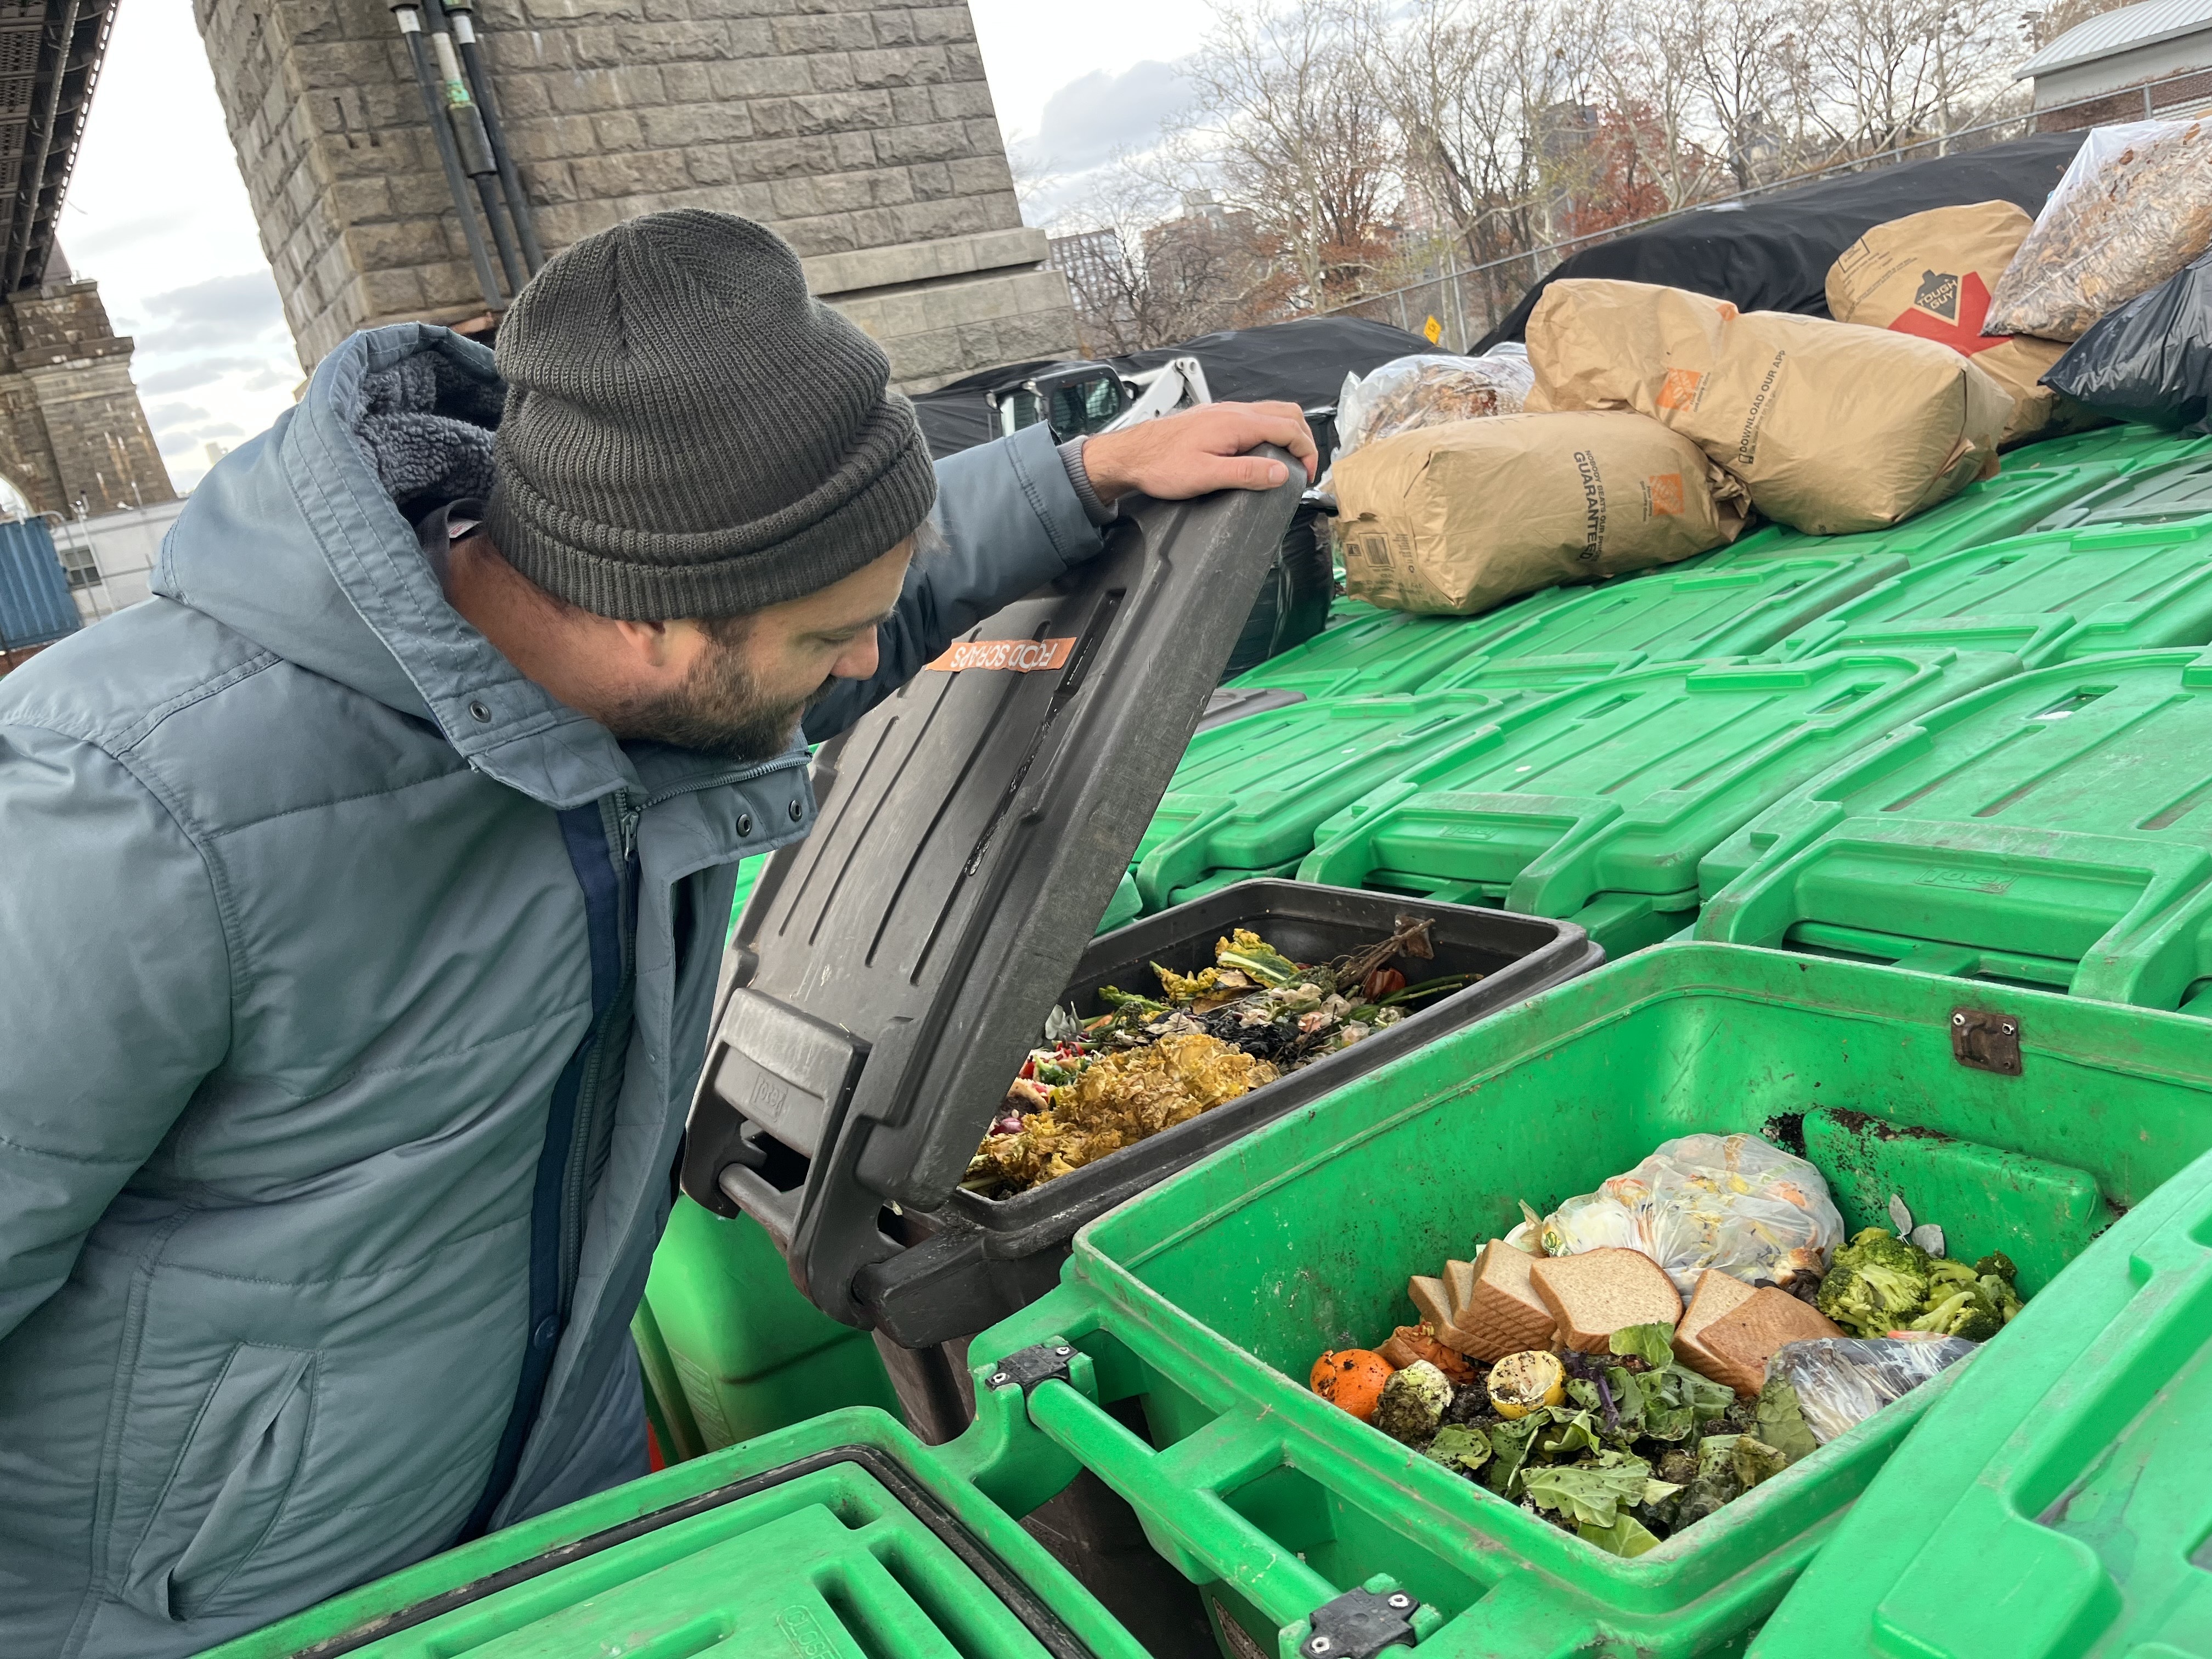 NYC Compost Project Manager Devin Reitsma examines food scraps from collection sites at greenmarkets that come to the Big Reuse composting site under the Queensborough Bridge.